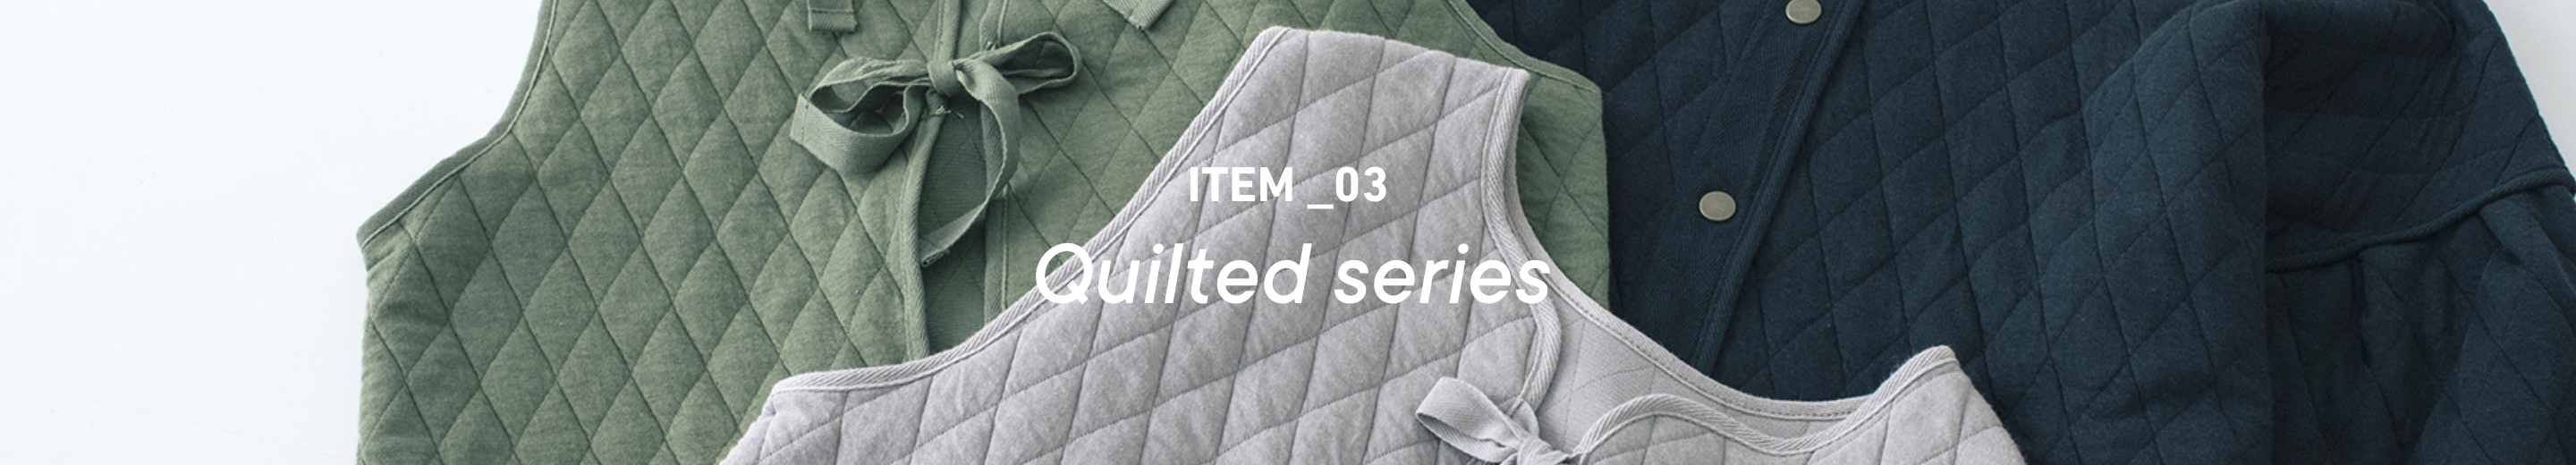 Quilted series